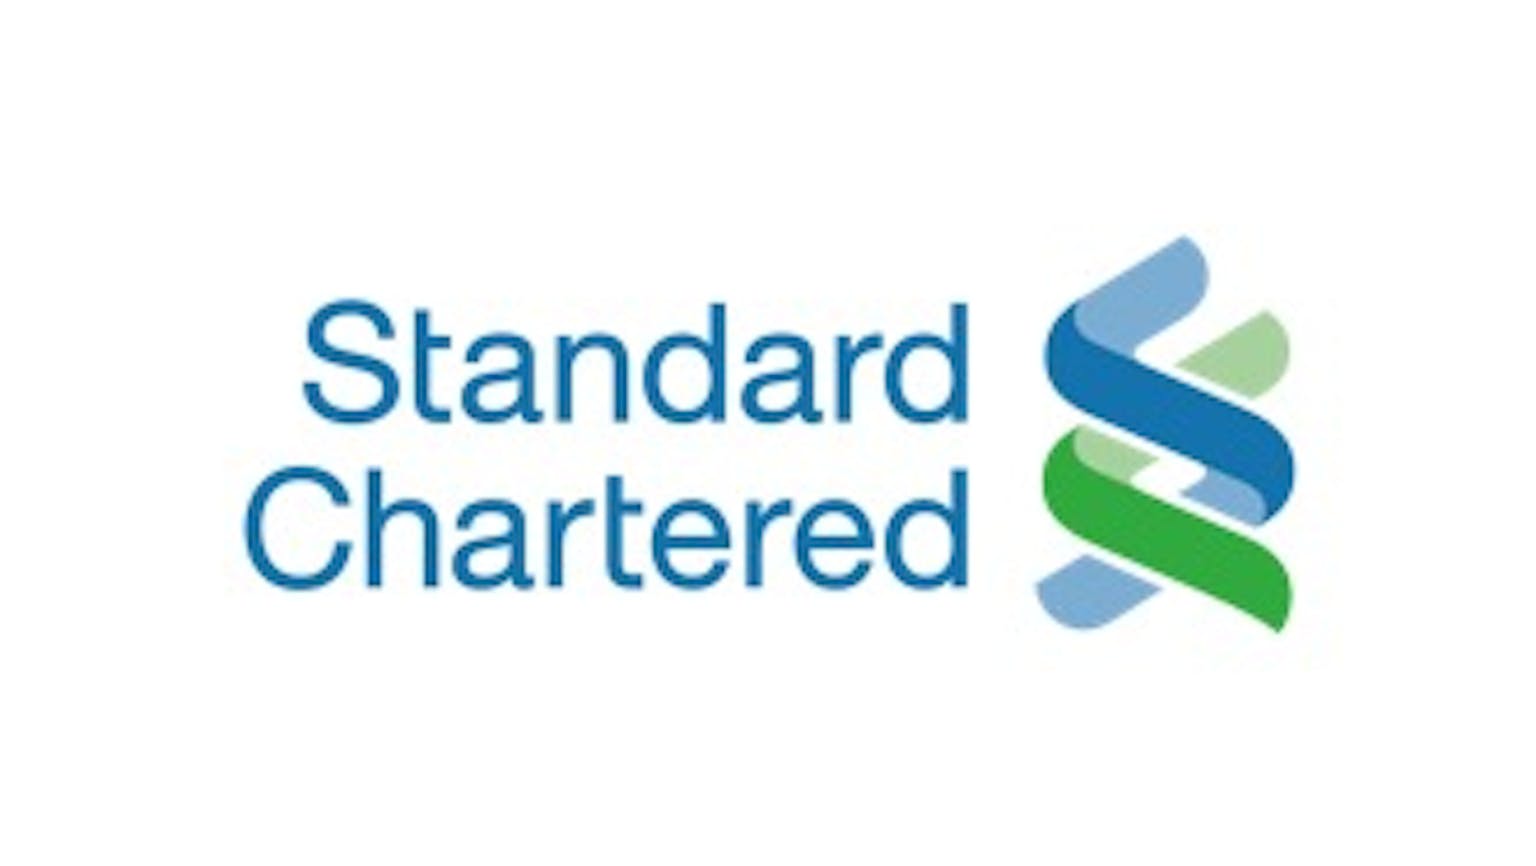 Foreign Currency Saving Standard Chartered